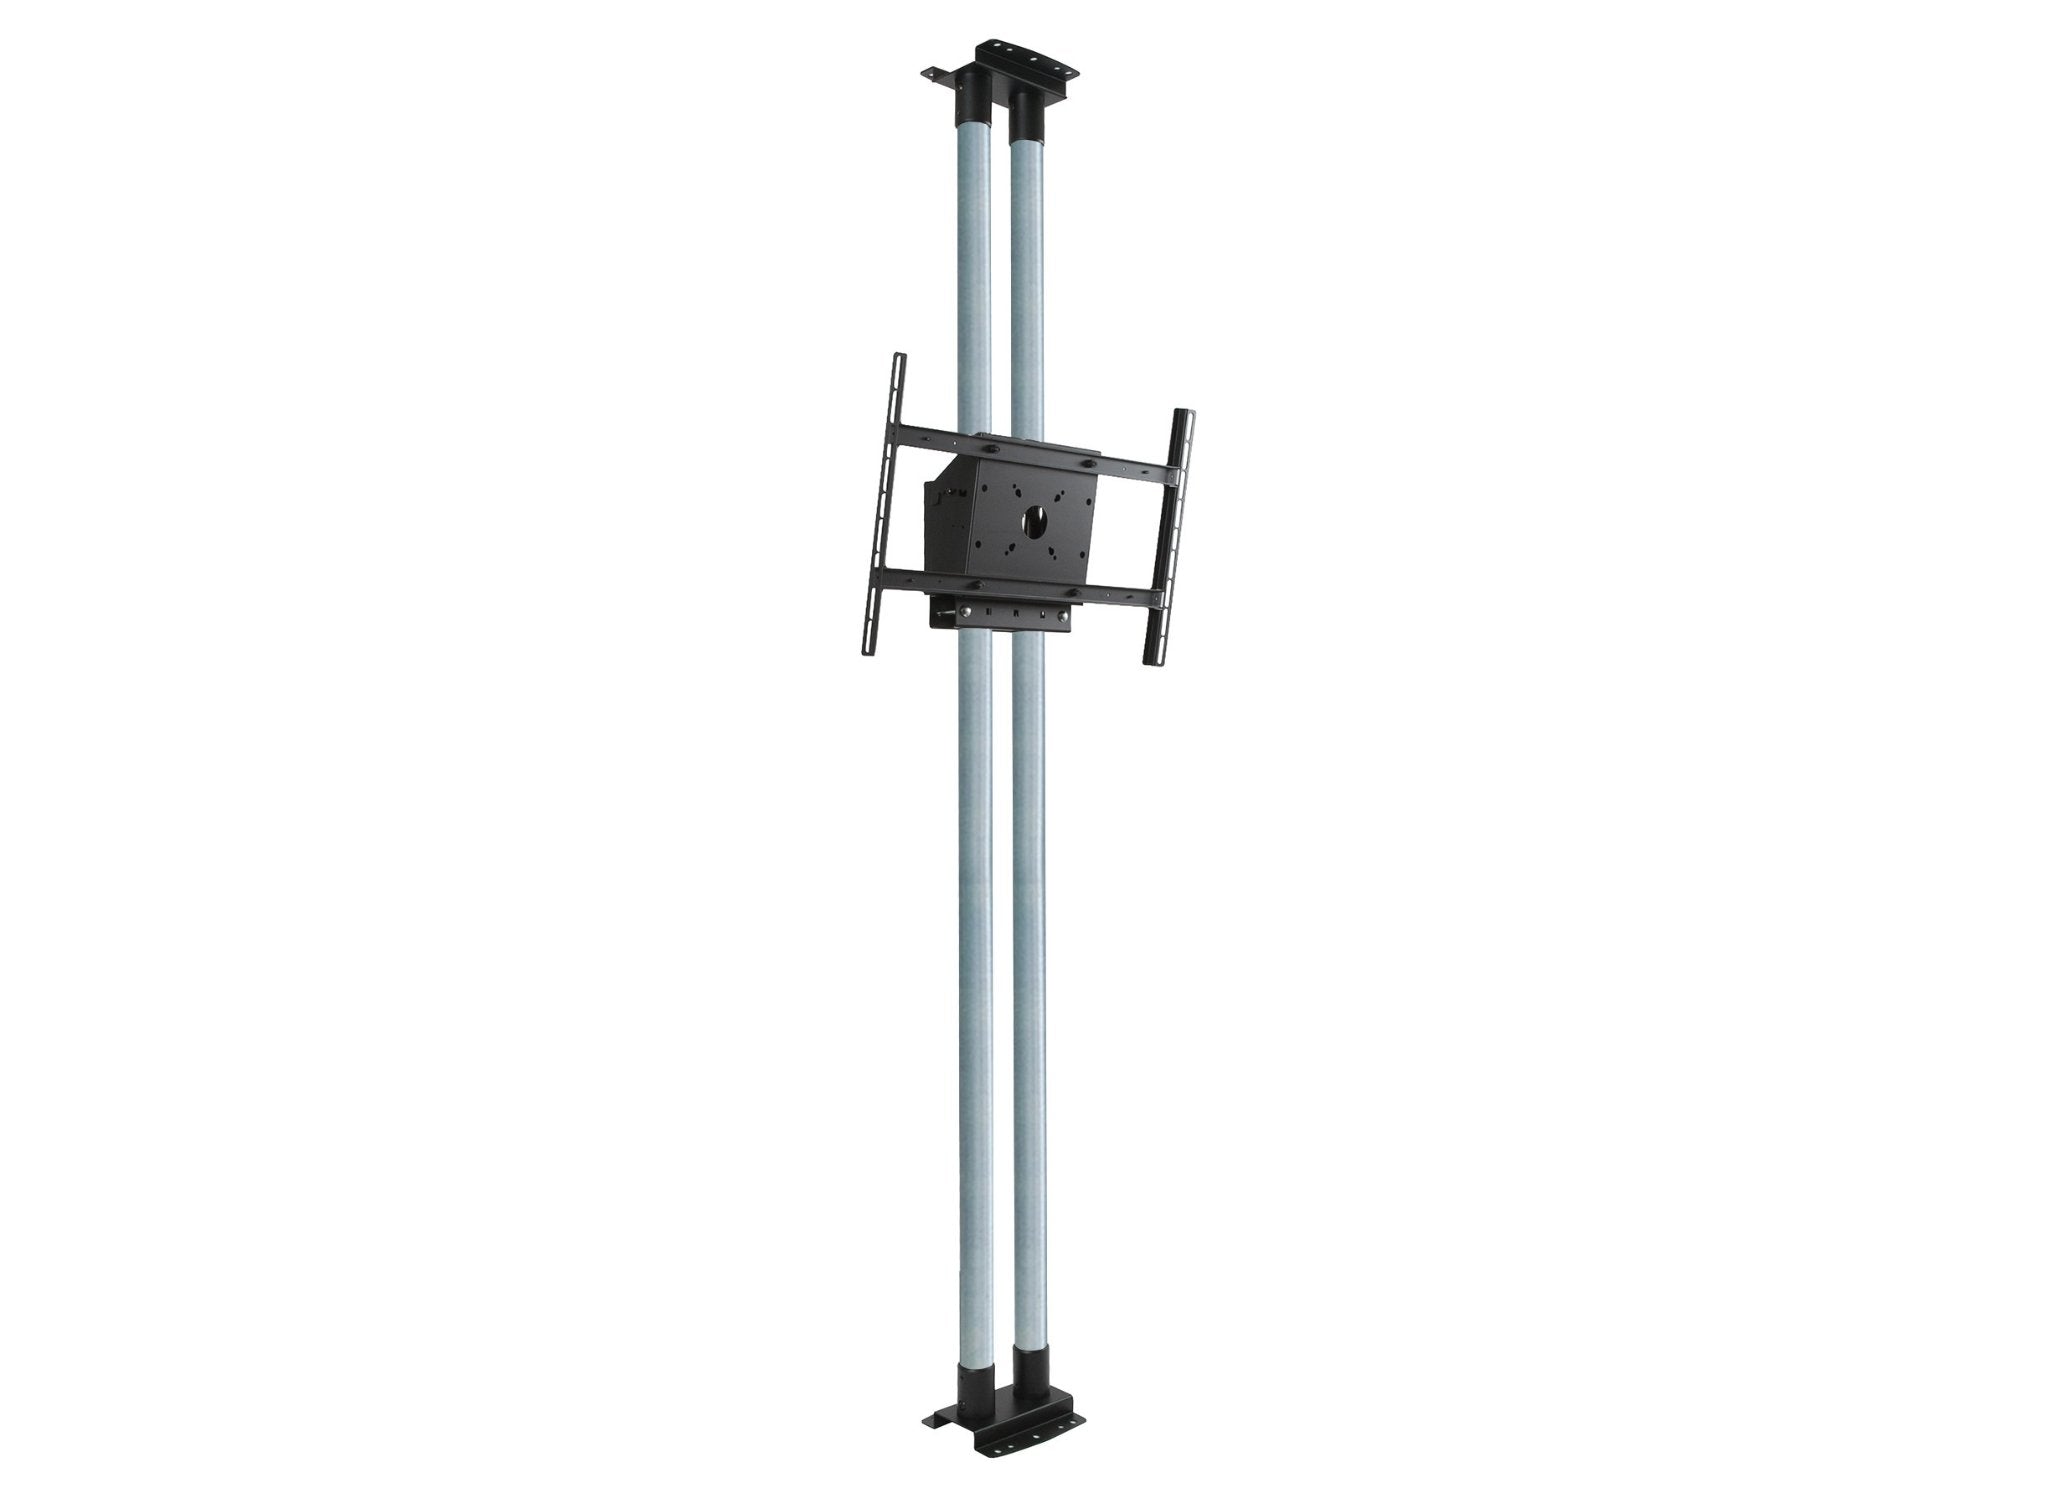 Modular Dual Pole Floor To Ceiling Mount Kit For 46 To 90 Displays